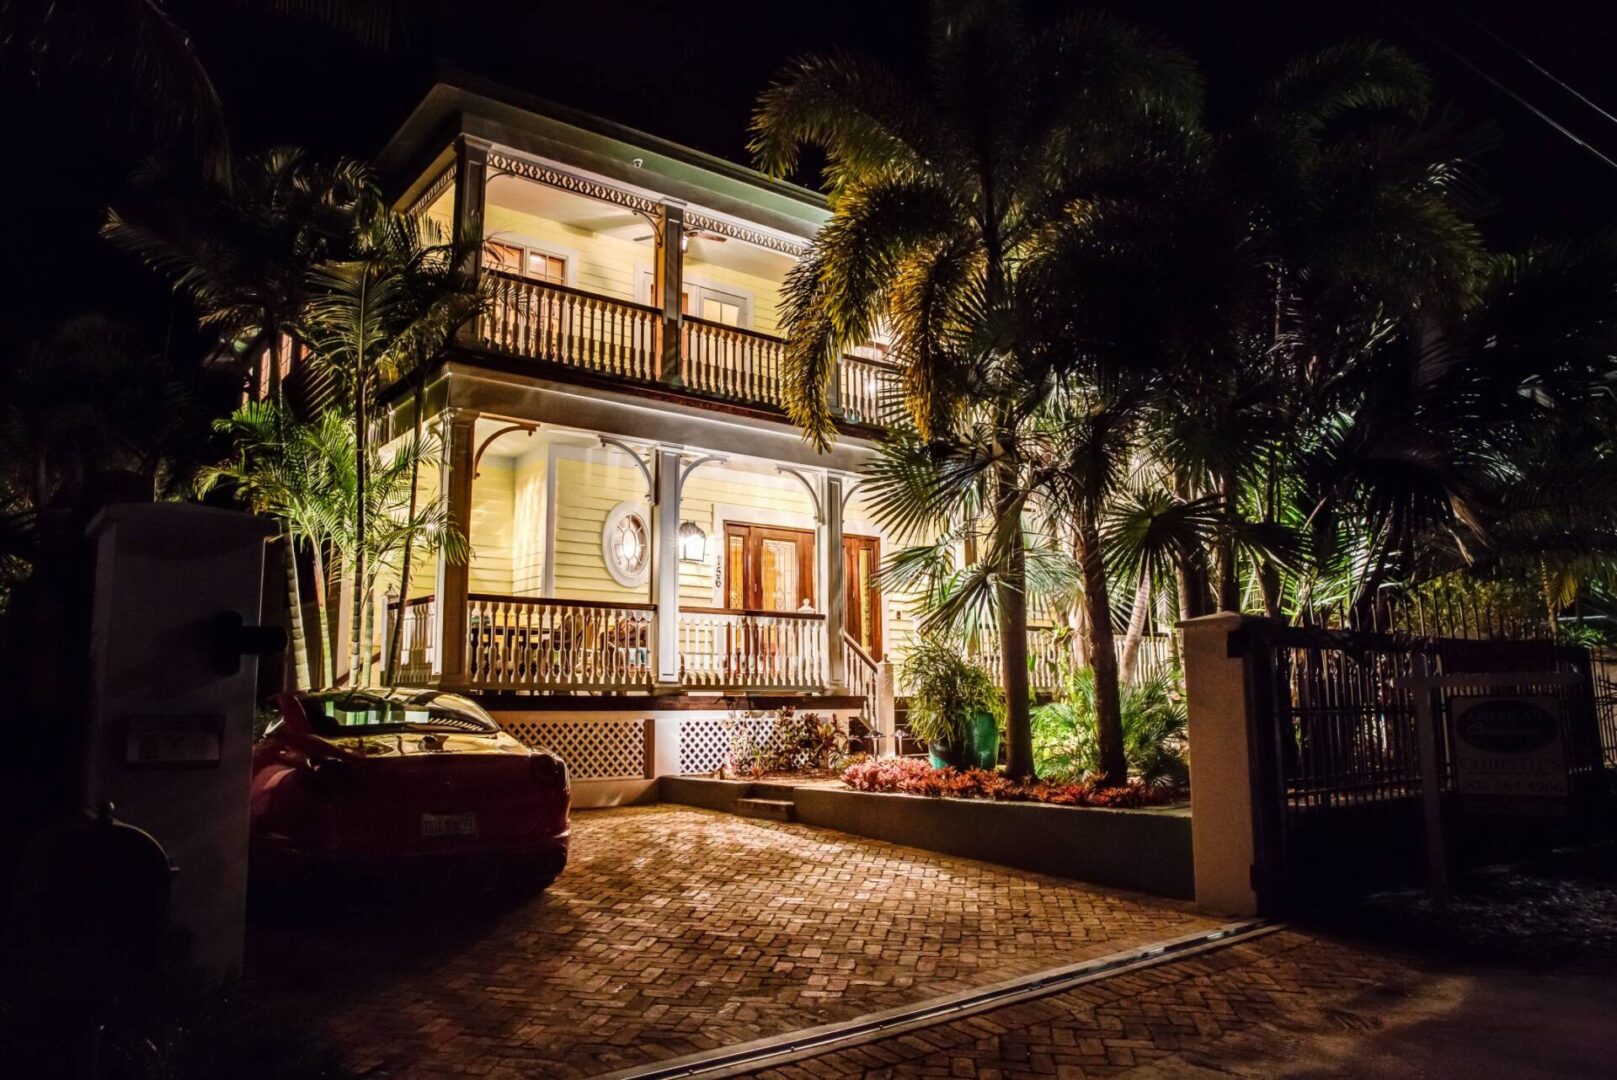 A night time photo of a house with palm trees.